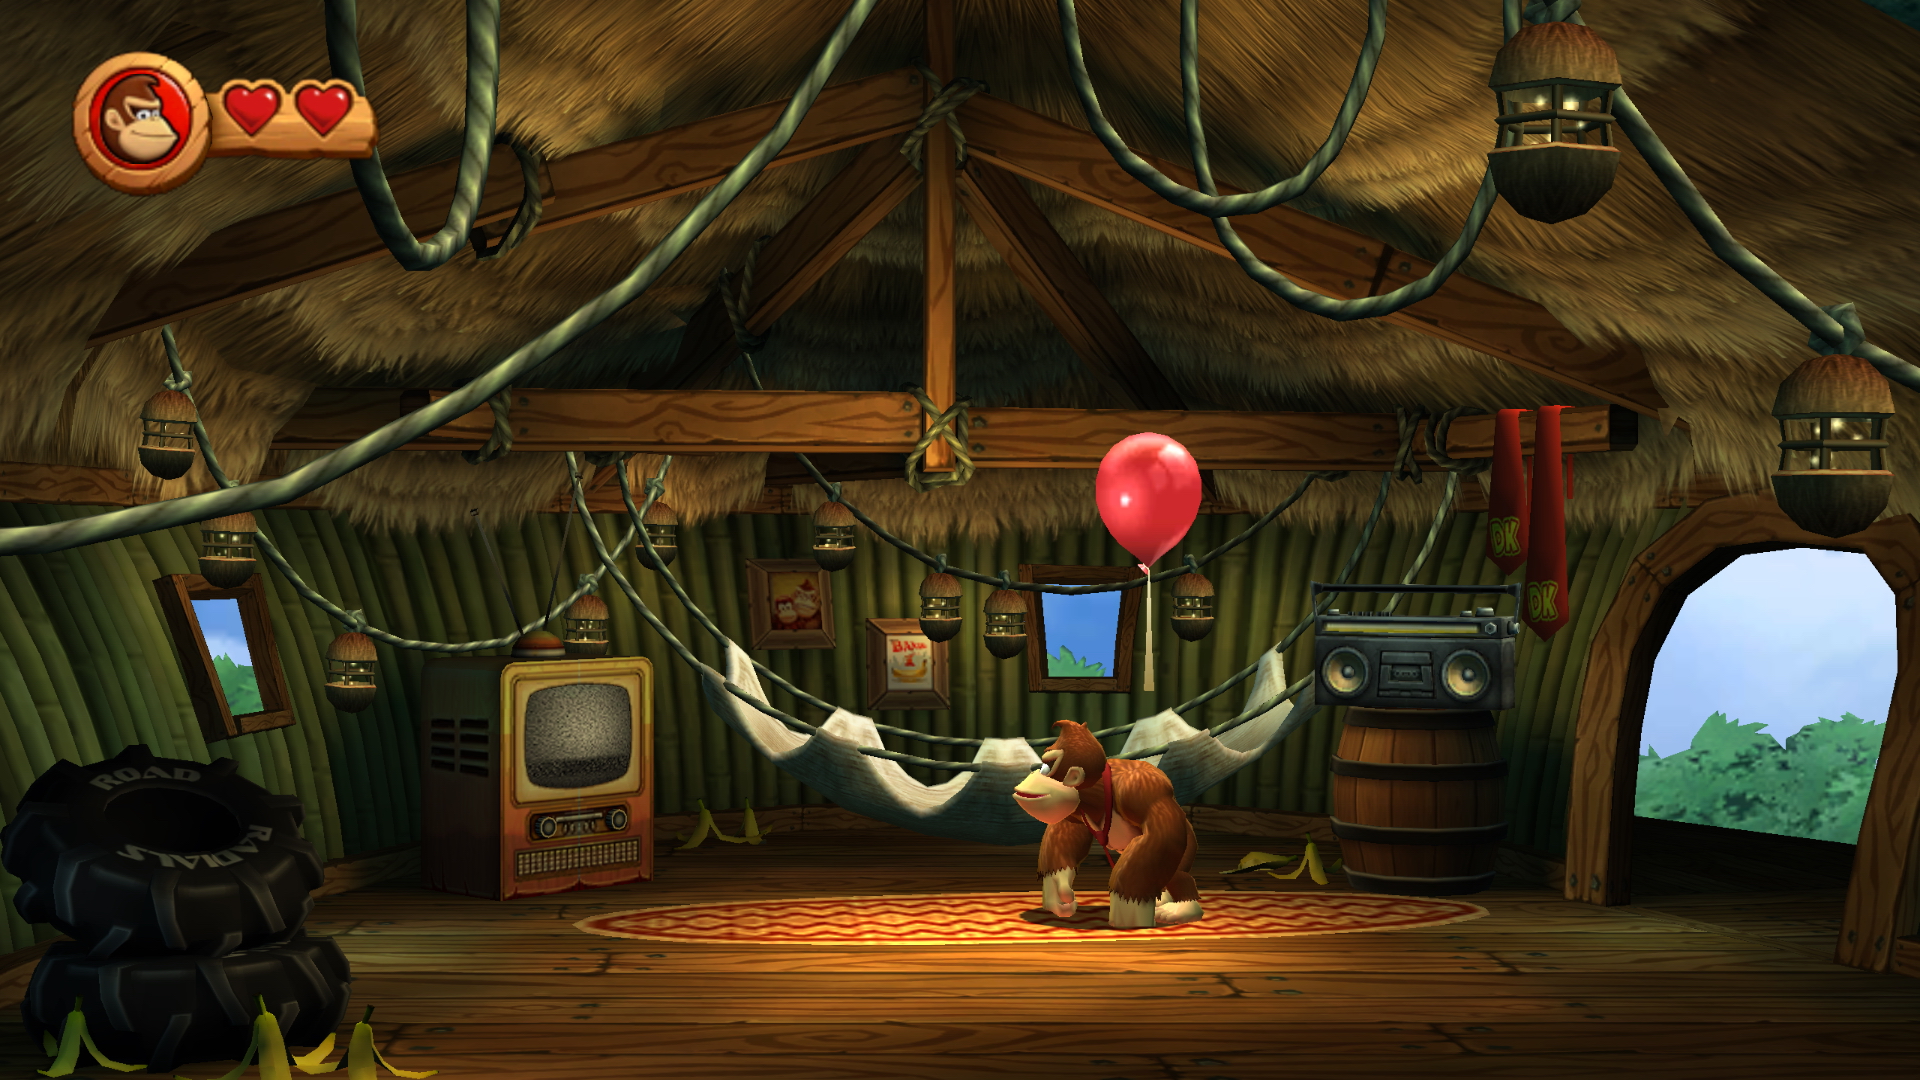 donkey kong country returns ds